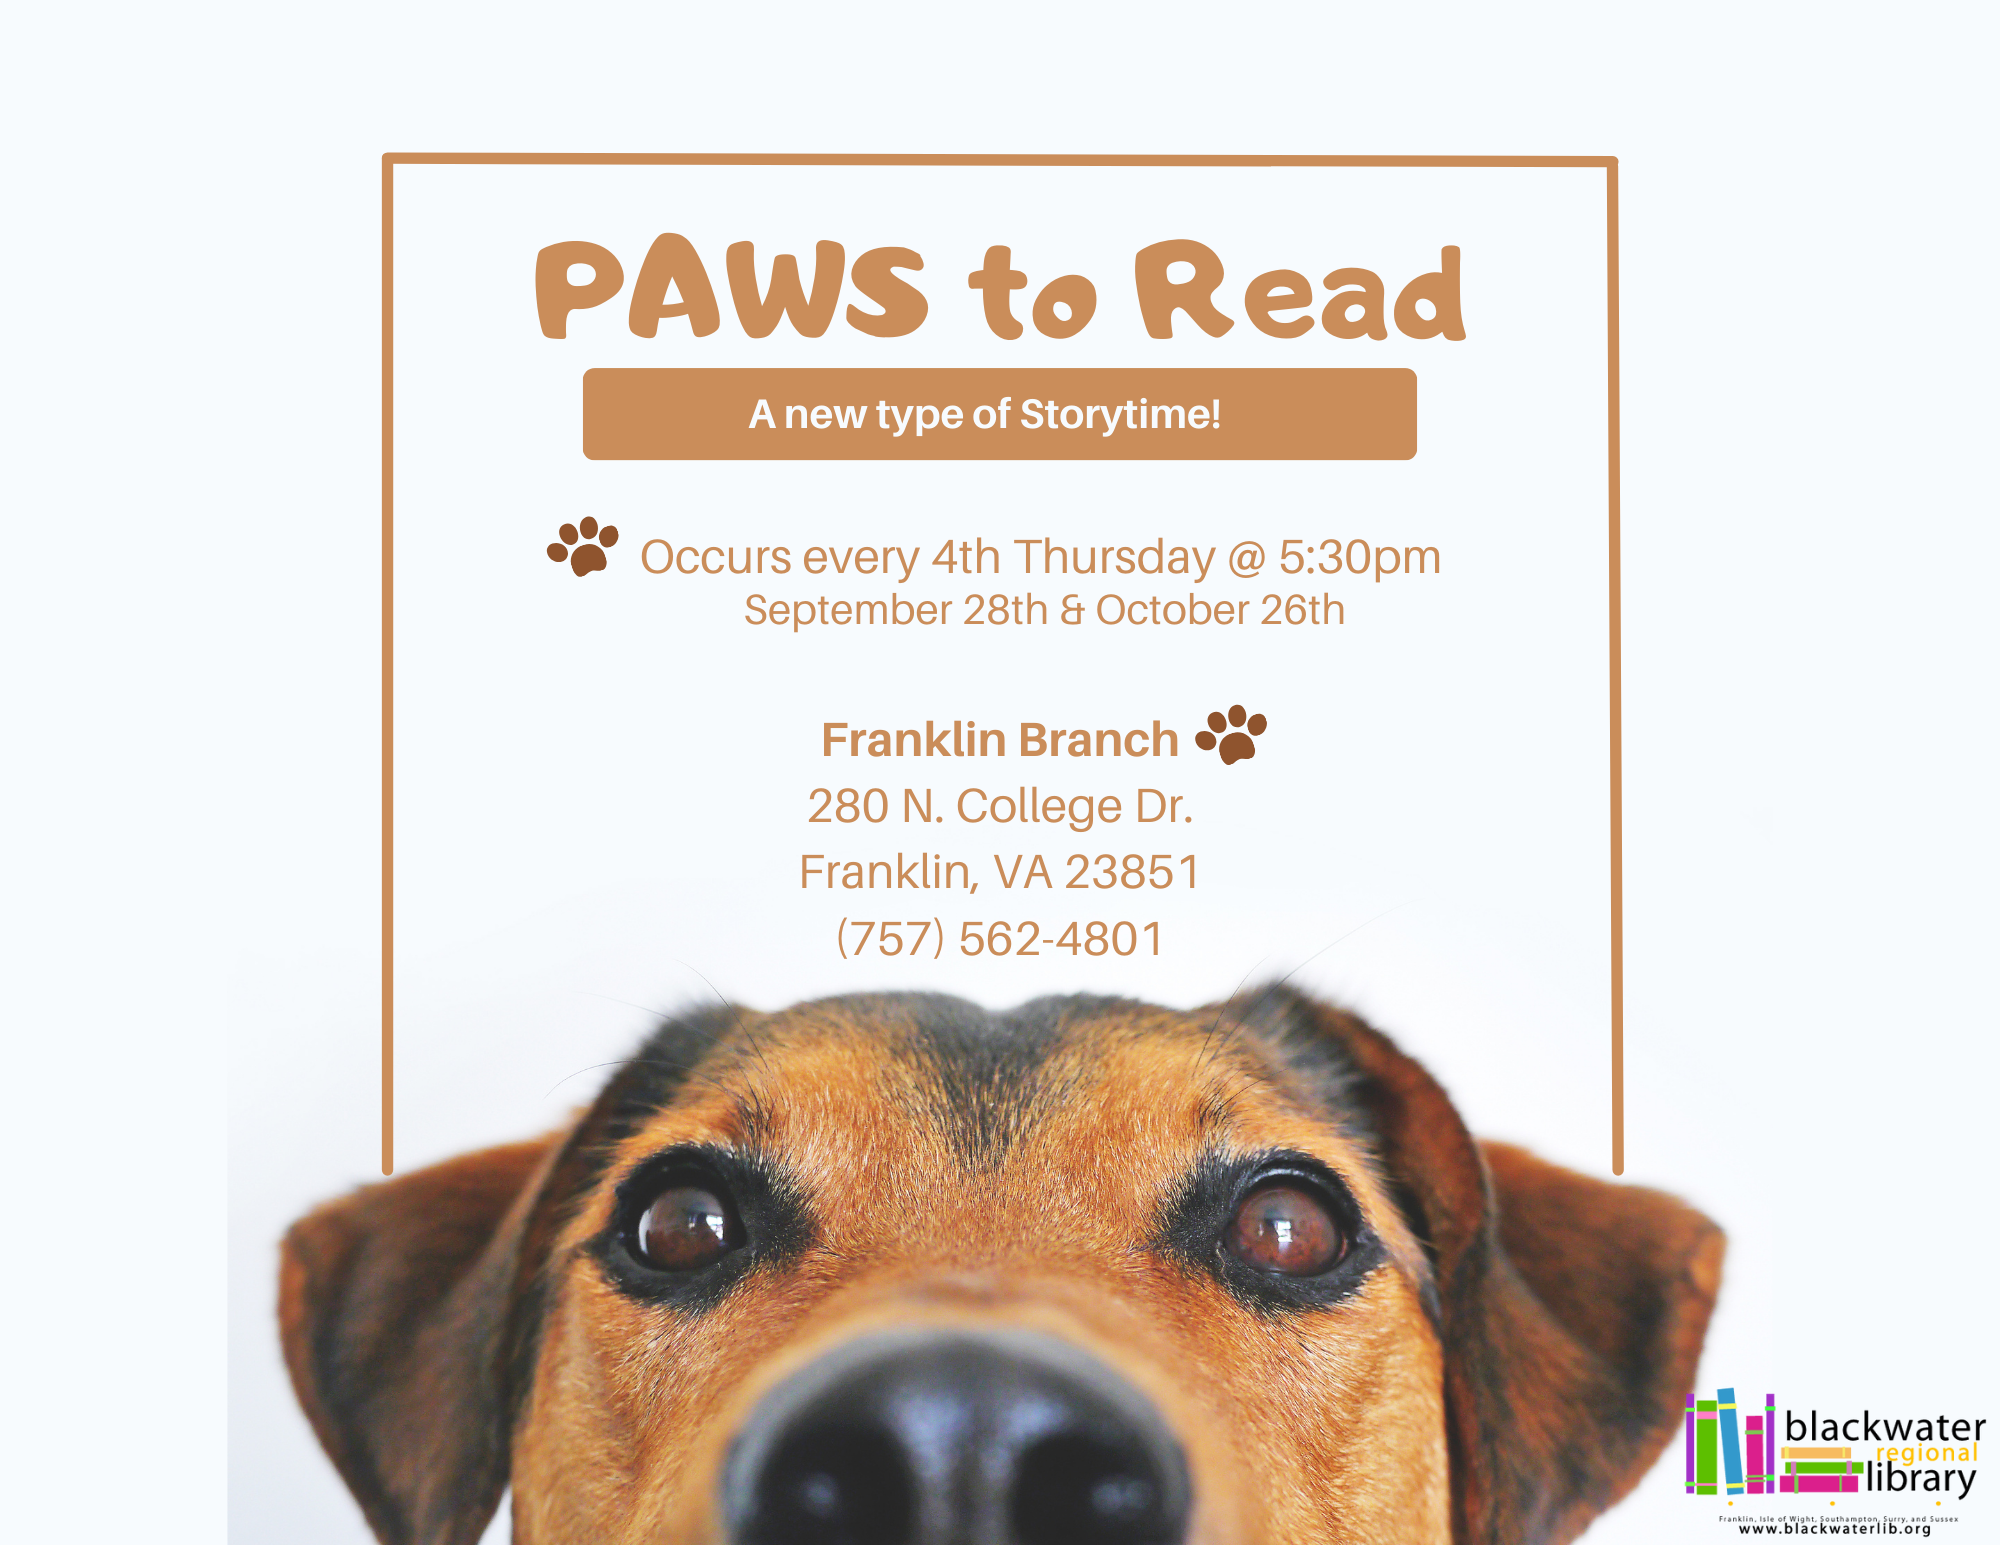 Paws to read is a great way to have students practice their reading skills. Join our furry friend and spend the evening reading with us!